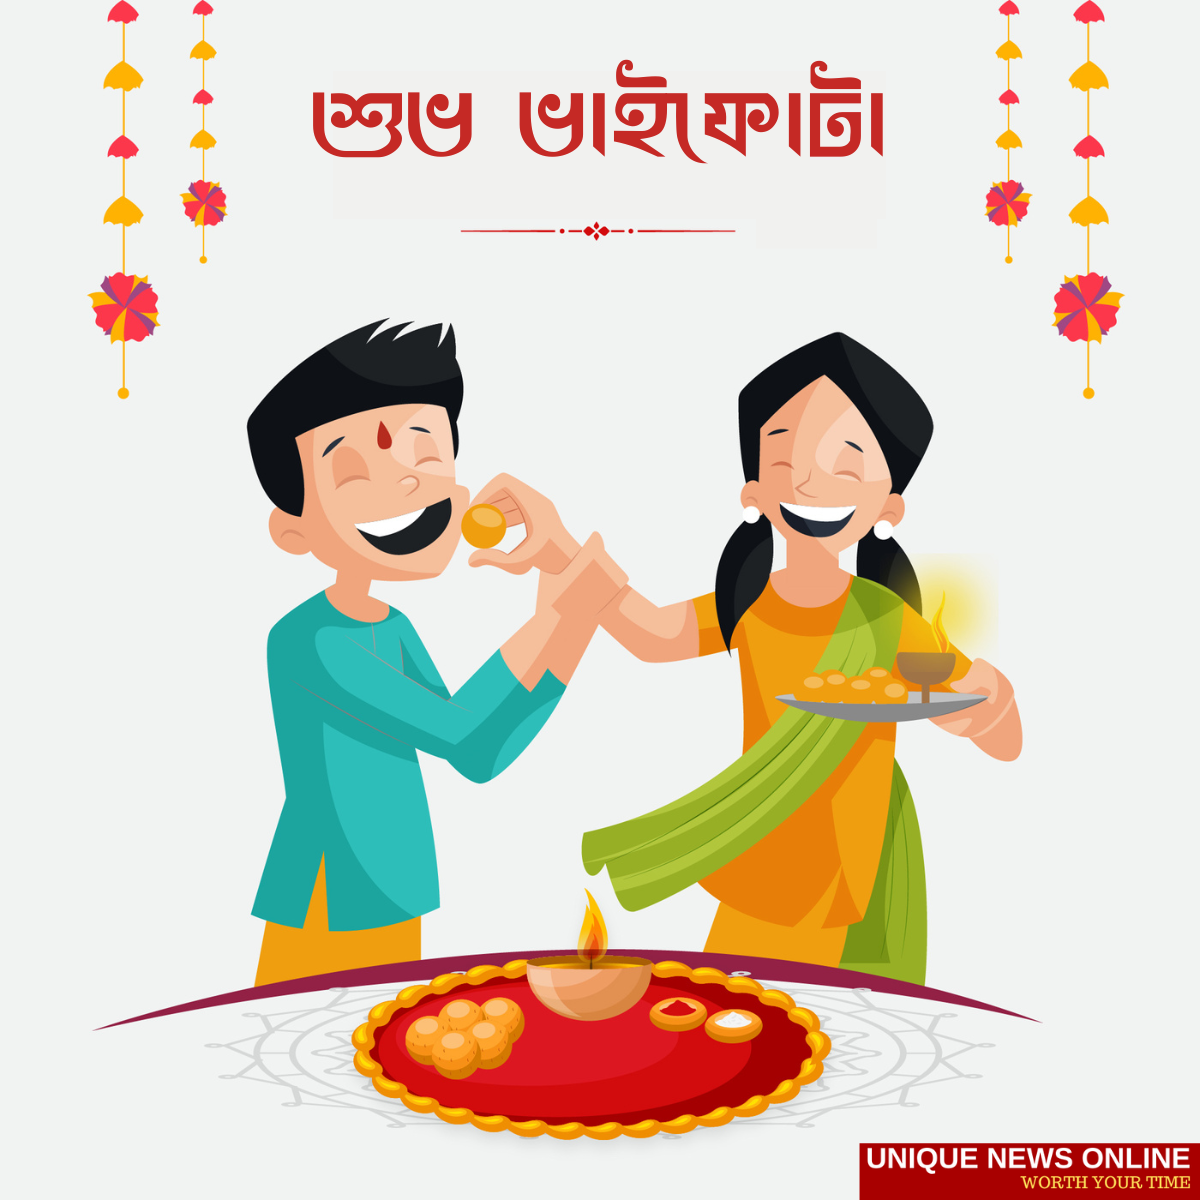 Bhai Phota 2022 Wishes in Bengali: Messages, HD Images, Greetings, Quotes, Posters, and Status